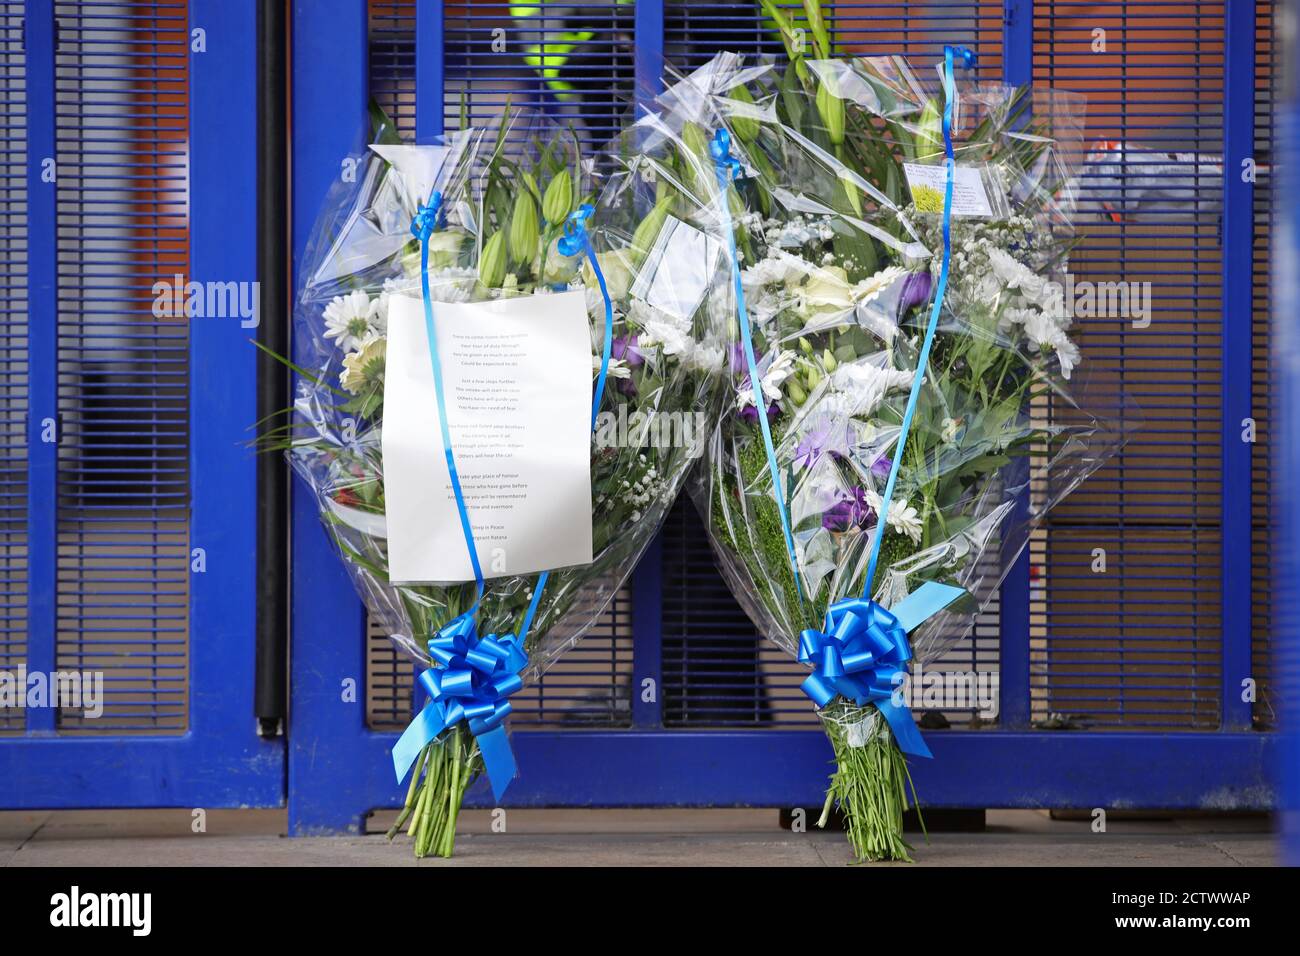 Flowers left outside Croydon Custody Centre in south London where a police officer was shot by a man who was being detained in the early hours of Friday morning. The officer was treated at the scene before being taken to hospital where he subsequently died. Stock Photo